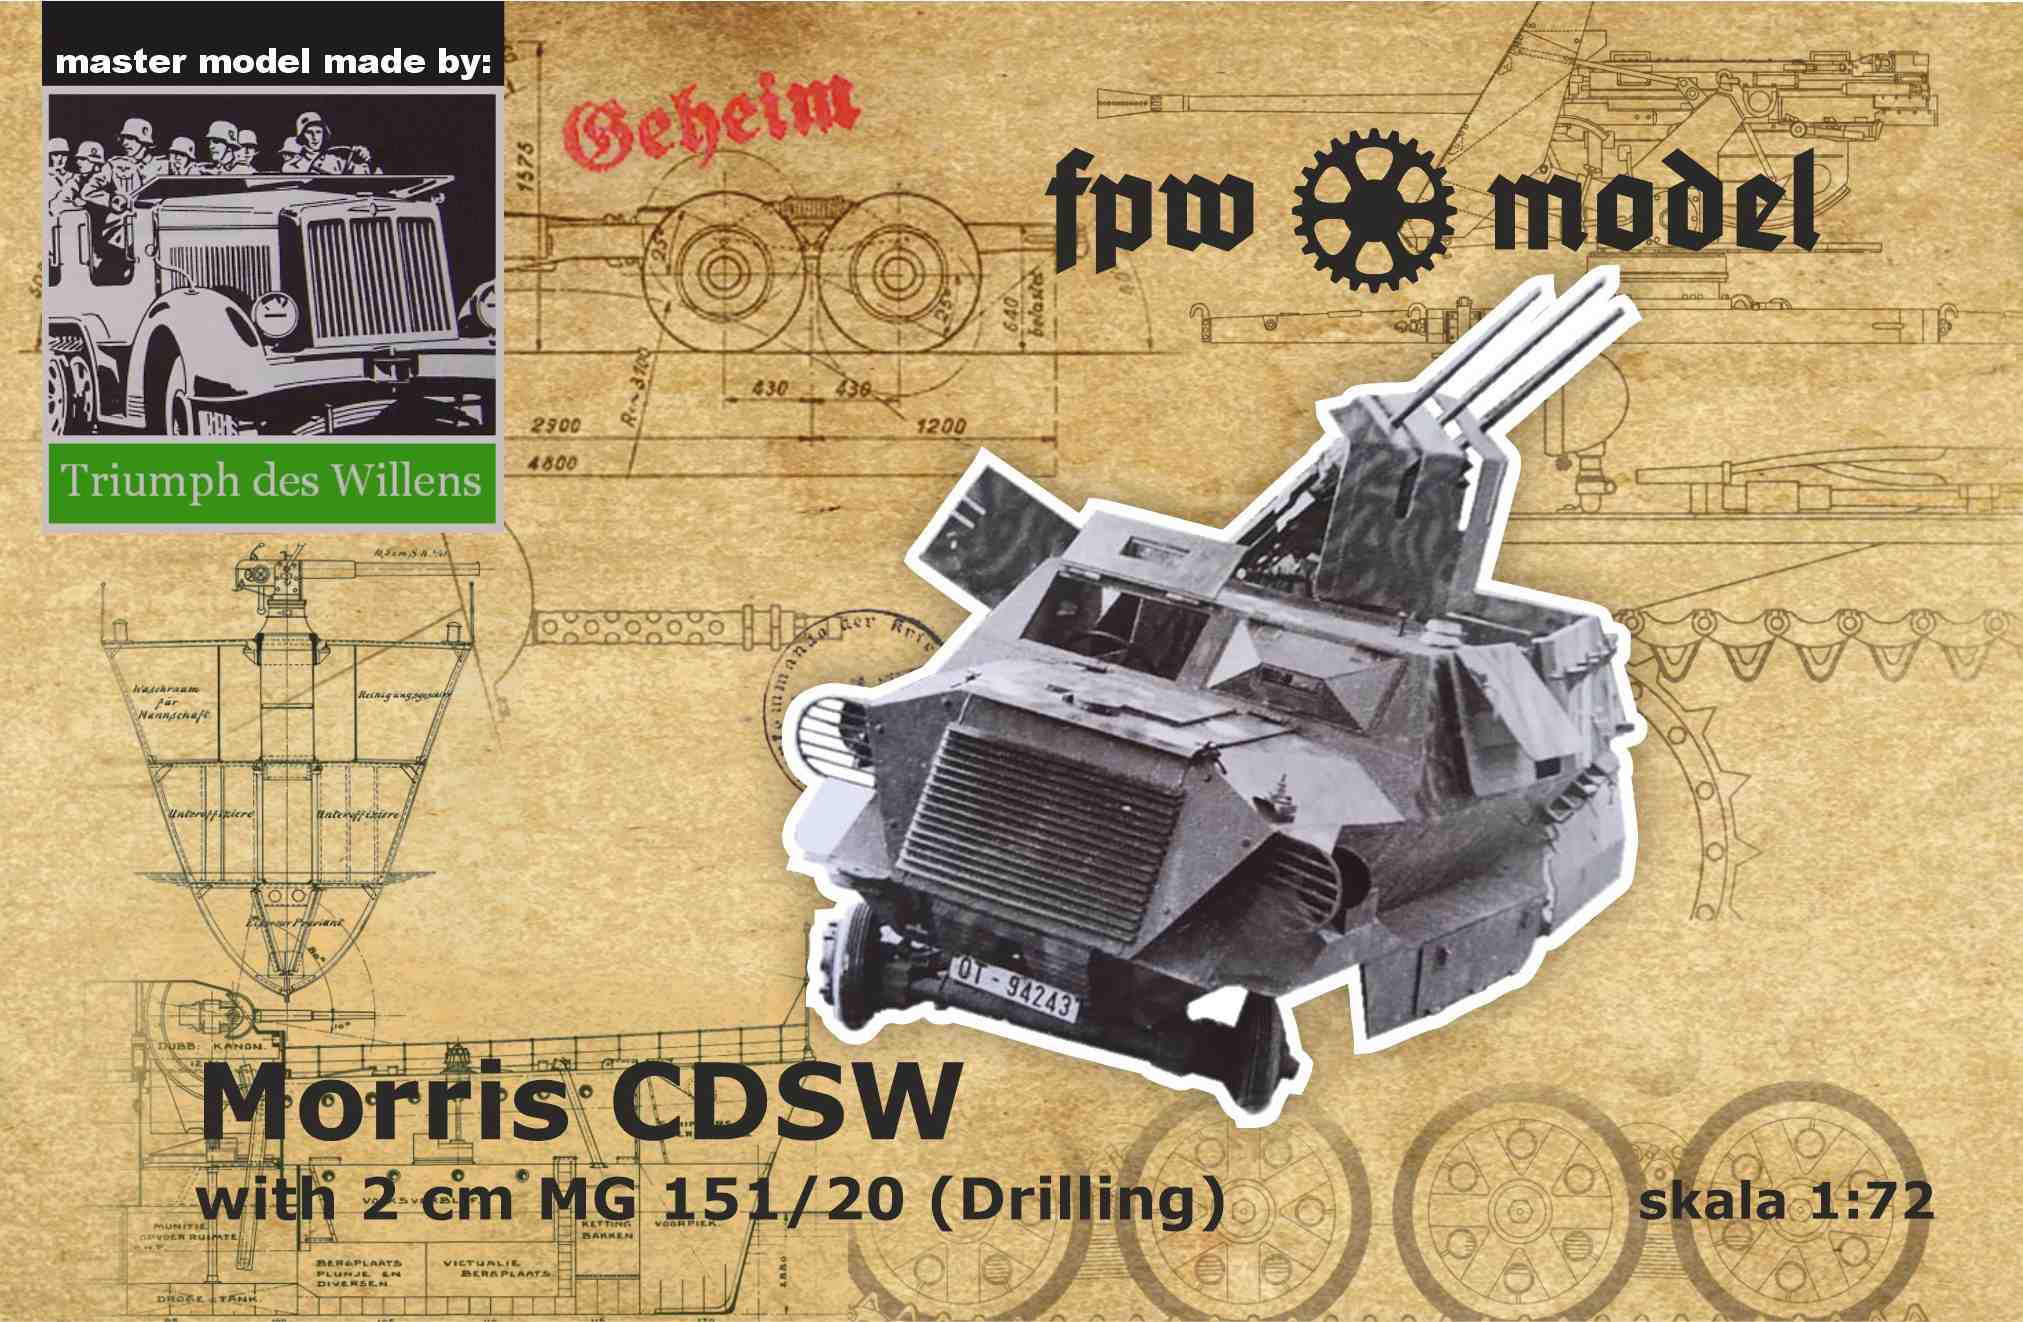 Morris CDSW with Drilling